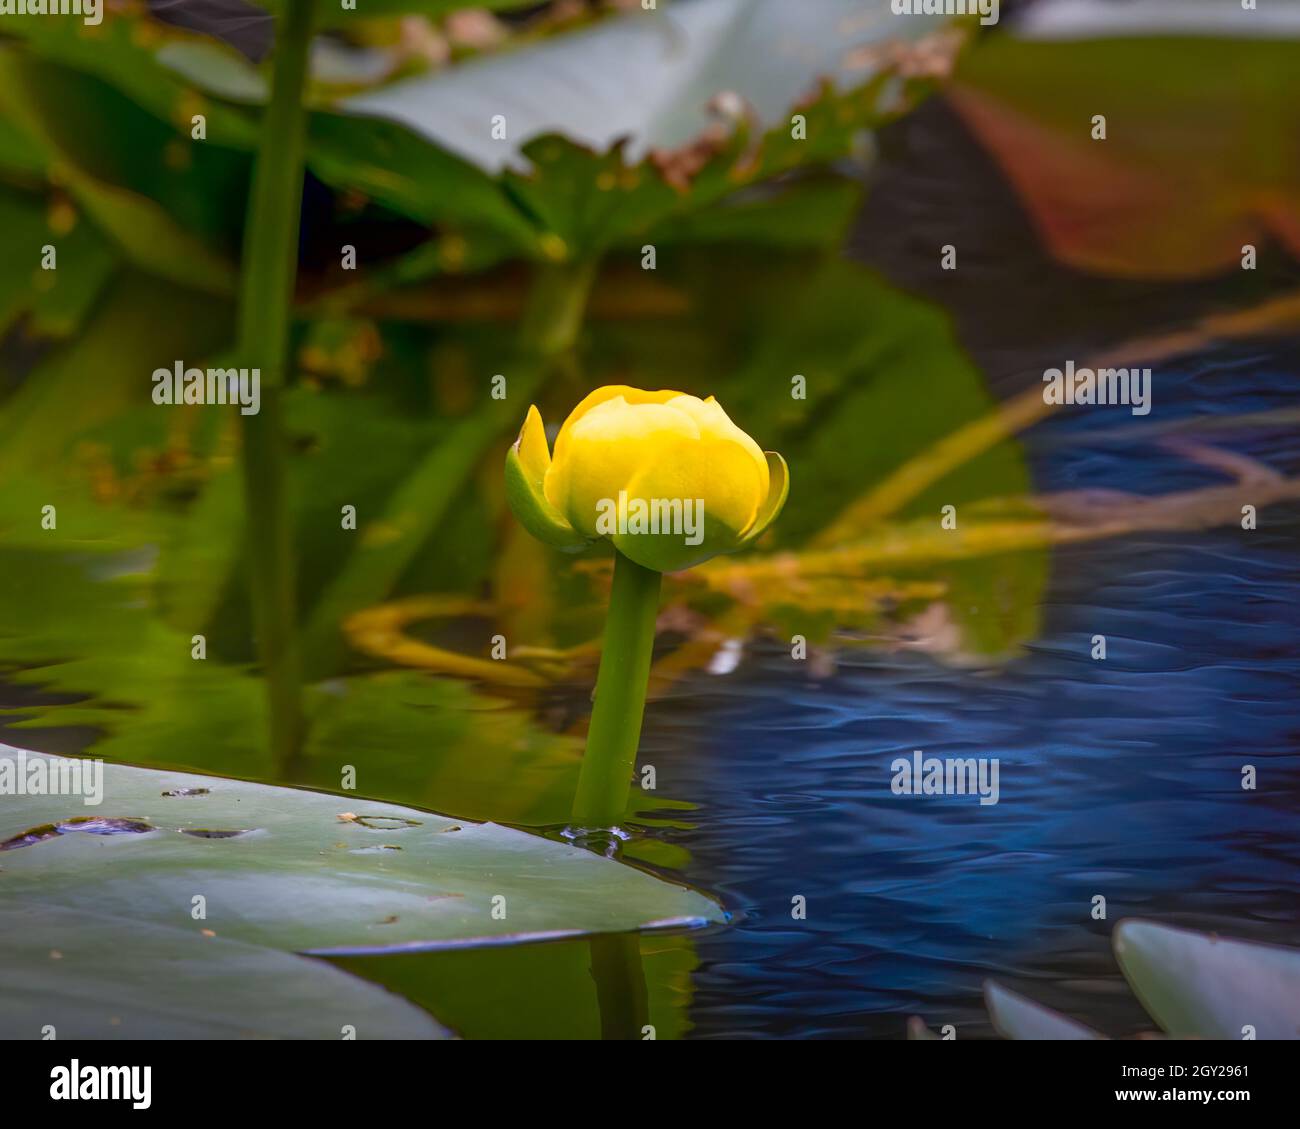 A Water Lily bud grows next to a lily pad in the Florida Everglades. Stock Photo